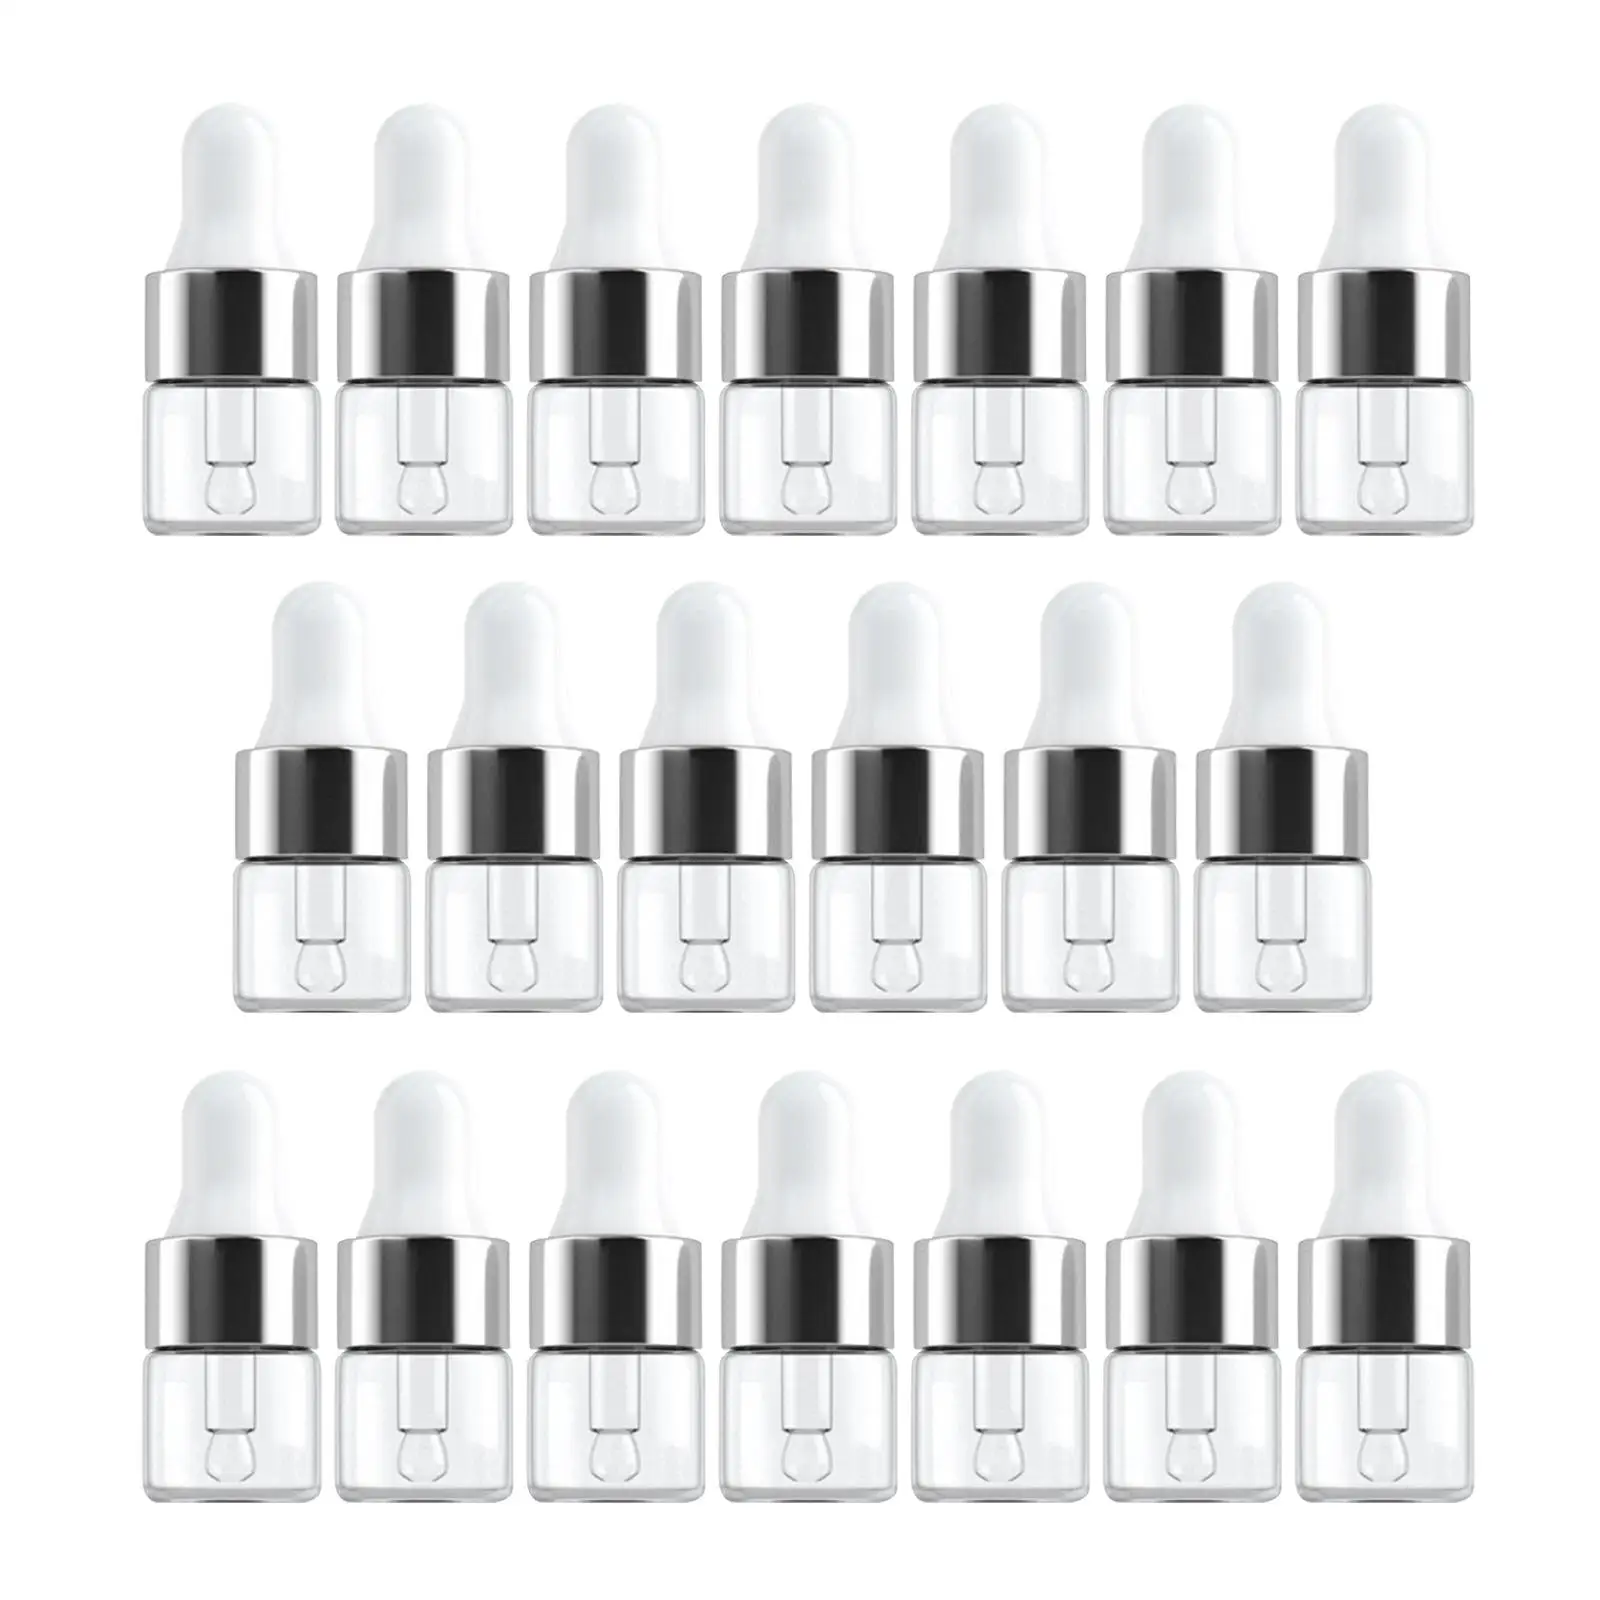 20x Empty Essential Oil Bottle Refillable Oil Containers Glass Bottle Clear Bottle Pocket Size Dropper Bottles for Travel SPA